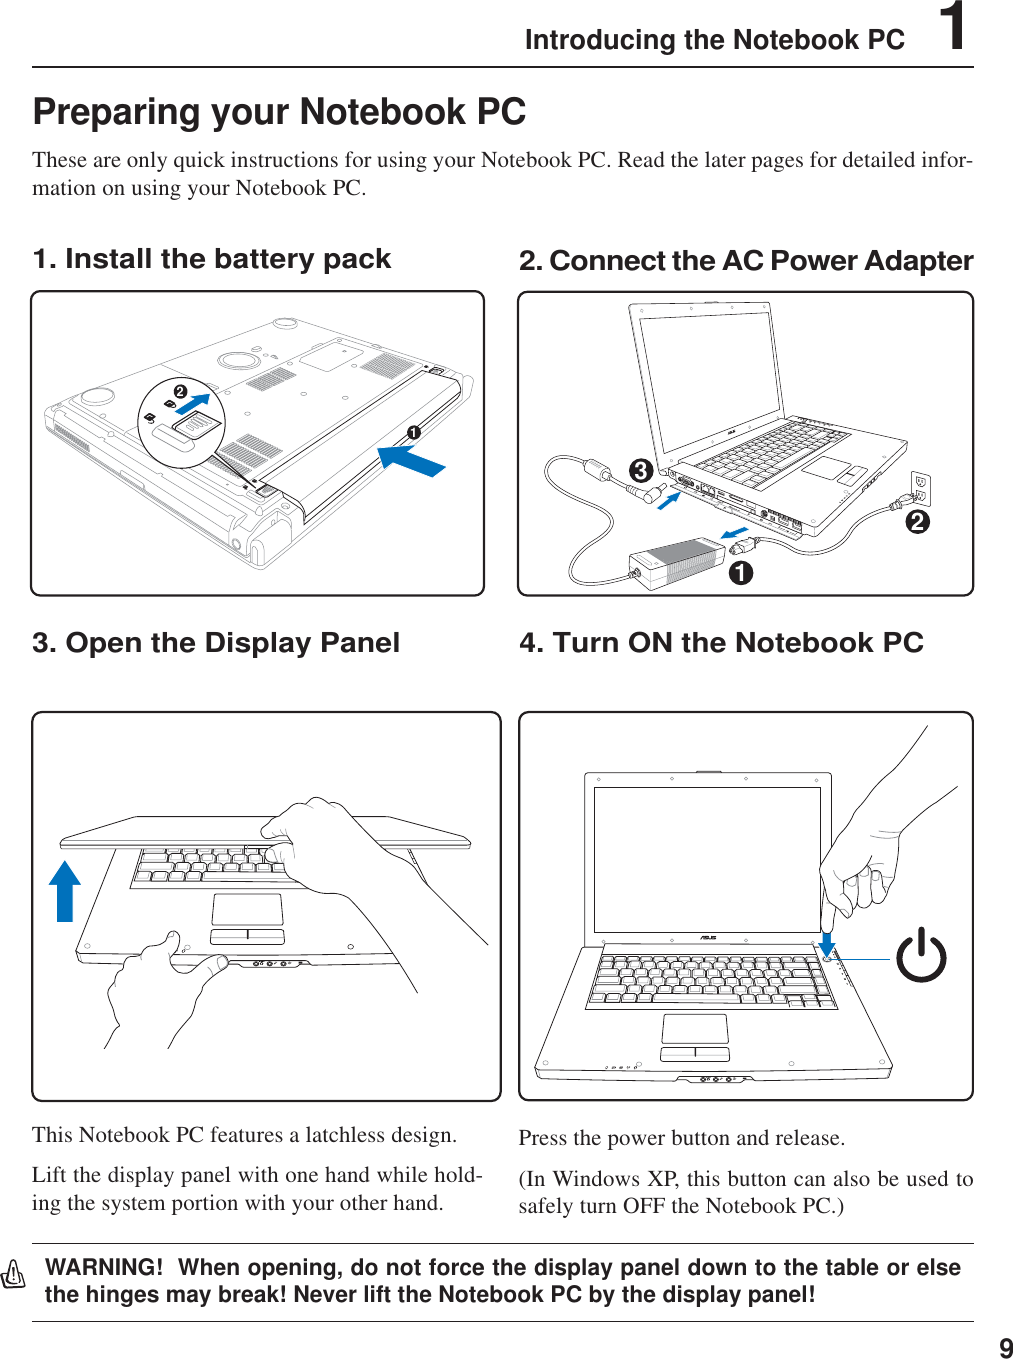 9Introducing the Notebook PC    1Preparing your Notebook PCThese are only quick instructions for using your Notebook PC. Read the later pages for detailed infor-mation on using your Notebook PC.1. Install the battery pack3. Open the Display Panel 4. Turn ON the Notebook PC2. Connect the AC Power AdapterPress the power button and release.(In Windows XP, this button can also be used tosafely turn OFF the Notebook PC.)12DV321WARNING!  When opening, do not force the display panel down to the table or elsethe hinges may break! Never lift the Notebook PC by the display panel!This Notebook PC features a latchless design.Lift the display panel with one hand while hold-ing the system portion with your other hand.